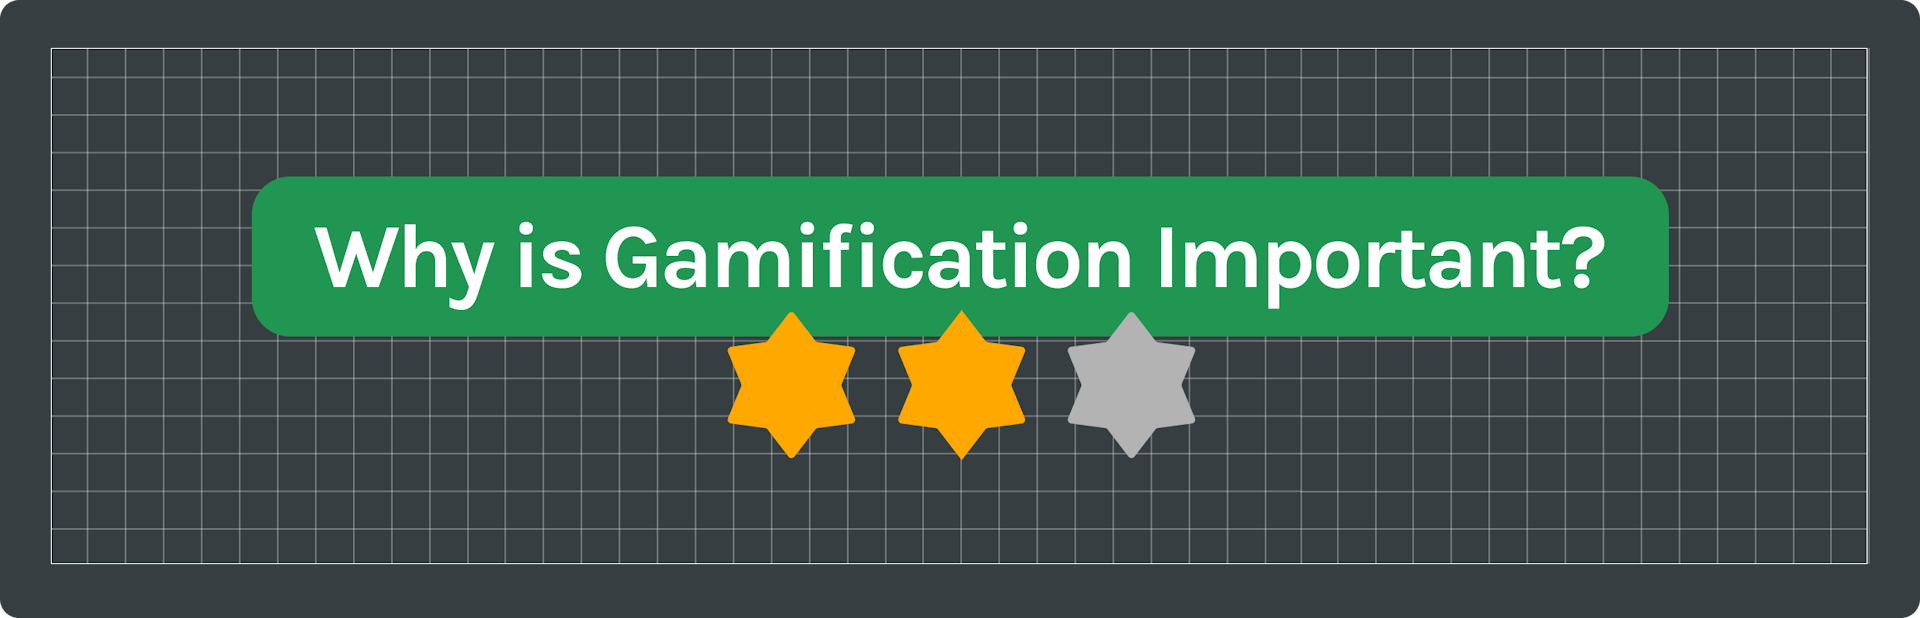 text saying "why is gamification important?" with two yellow stars and one grey one